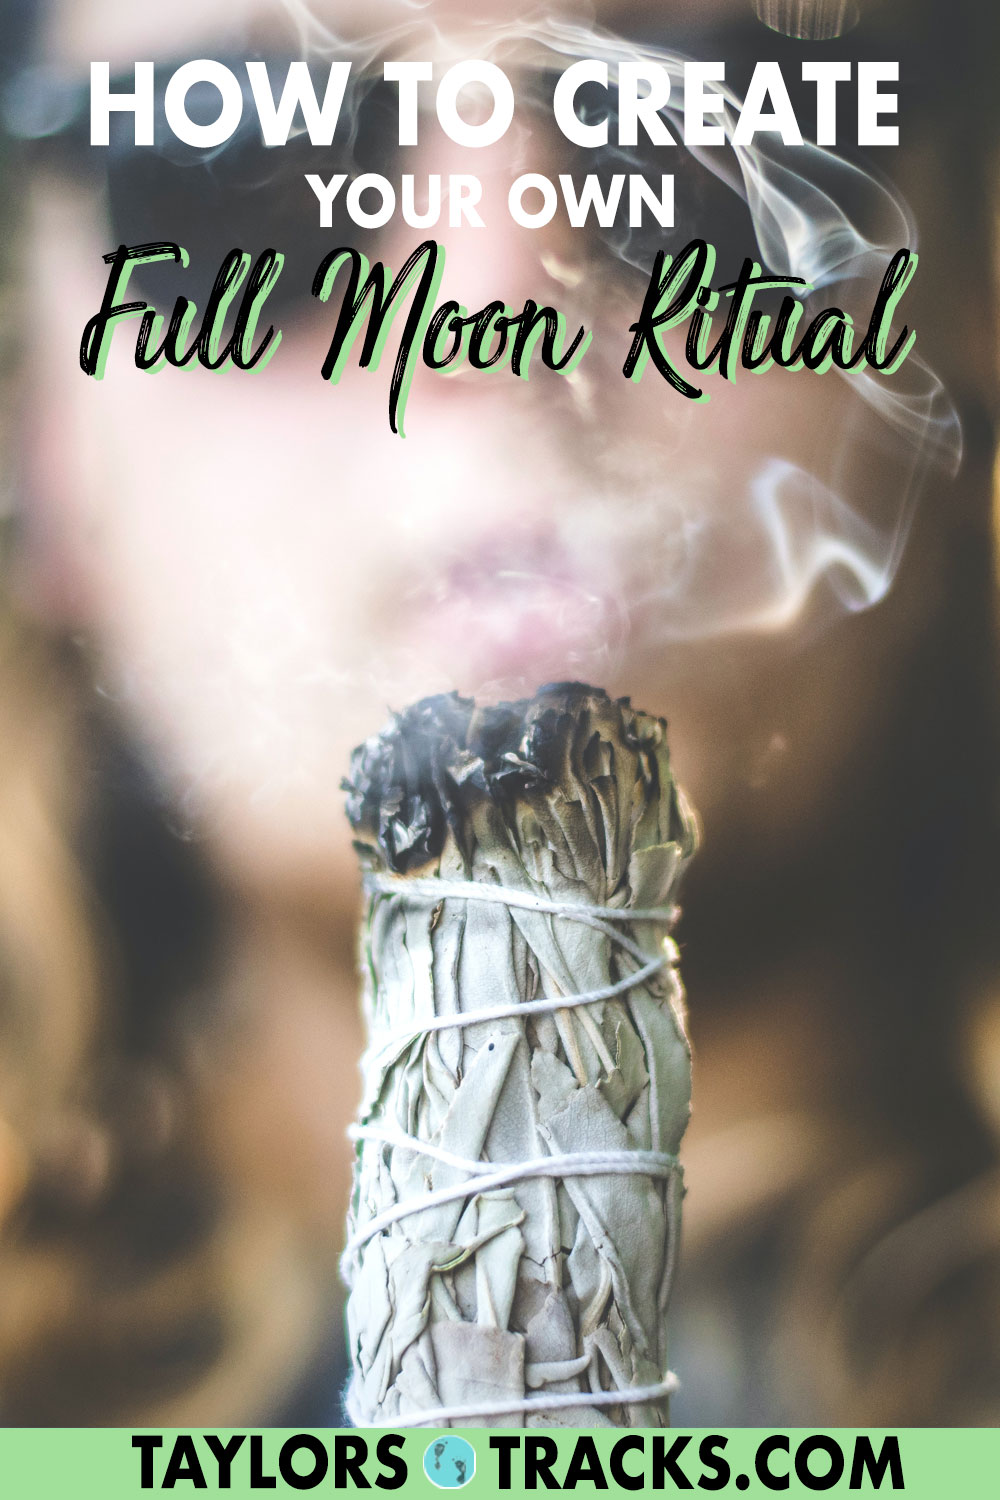 Release, let go and move on with this simple full moon ritual. This full moon ceremony can be done by anyone, requires little to no equipment and is powerful for manifesting with the moon, shedding what no longer serves you and feeling lighter. Click to start your own moon ritual!